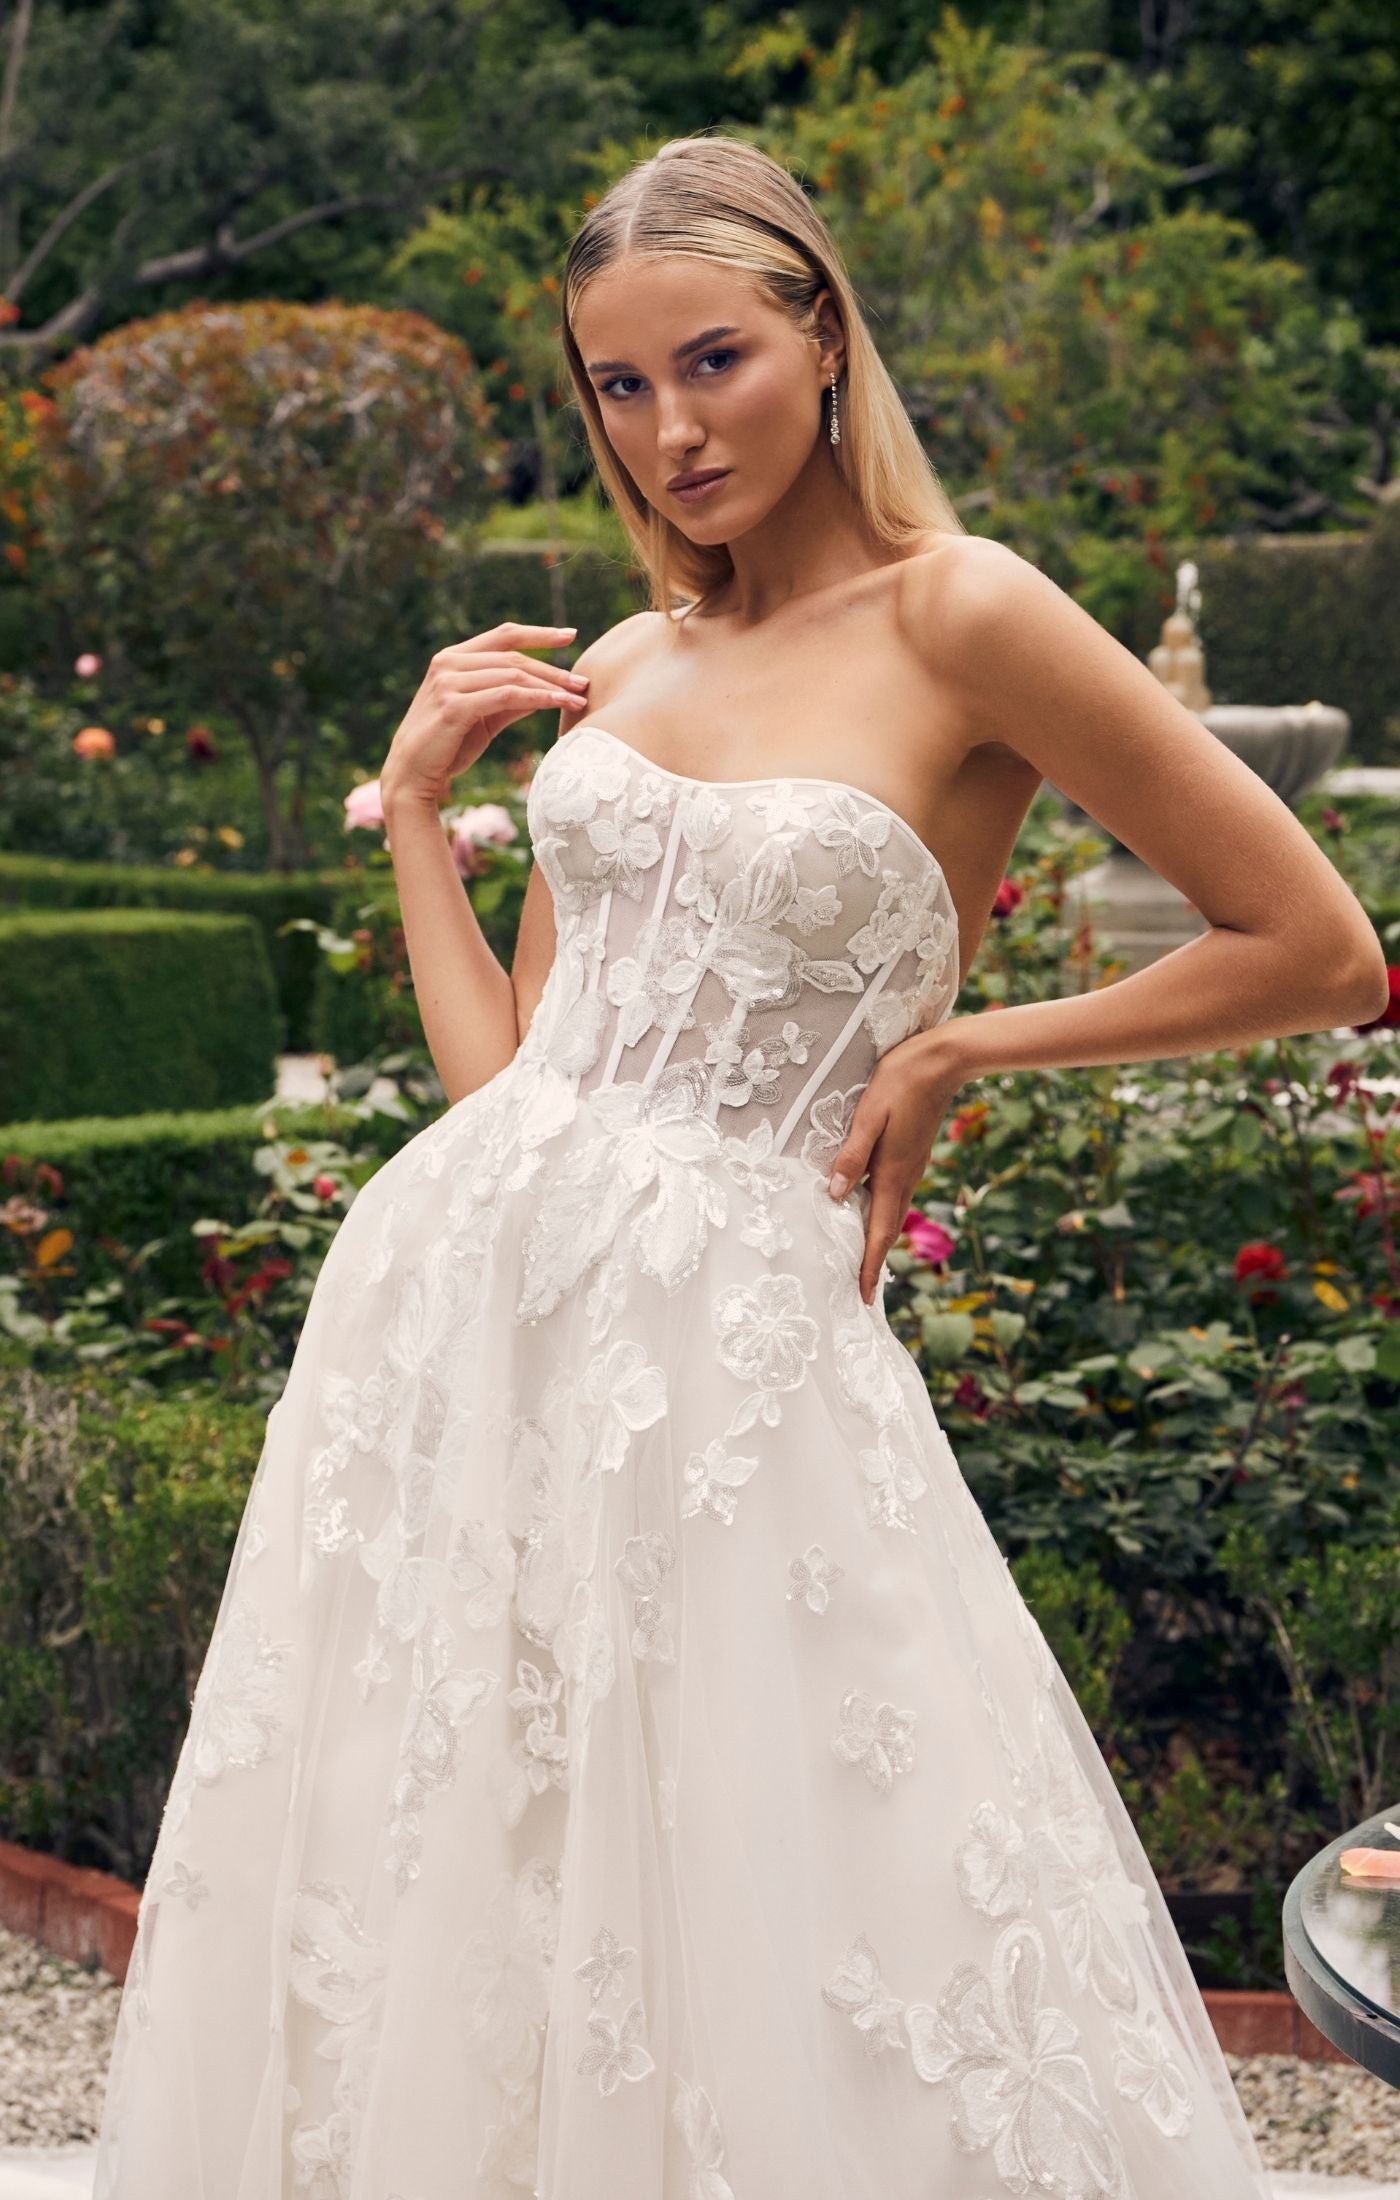 Romantic Floral Lace Ballgown Wedding Dress with Bustier Bodice